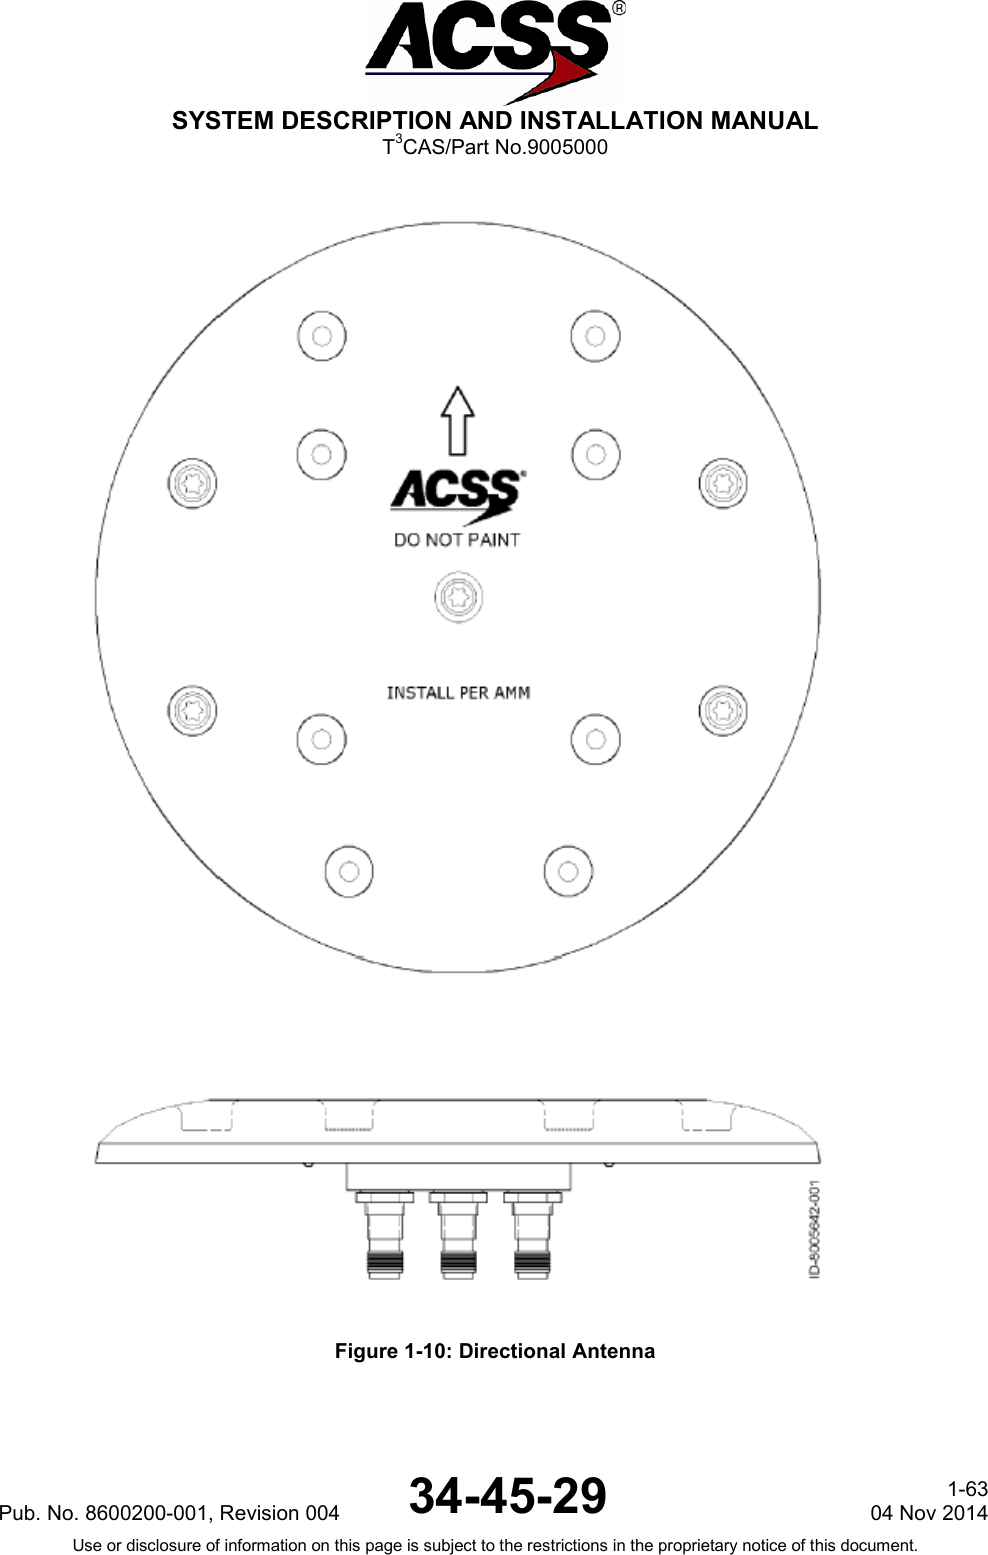  SYSTEM DESCRIPTION AND INSTALLATION MANUAL T3CAS/Part No.9005000  Figure 1-10: Directional Antenna  Pub. No. 8600200-001, Revision 004 34-45-29 1-63 04 Nov 2014 Use or disclosure of information on this page is subject to the restrictions in the proprietary notice of this document.  